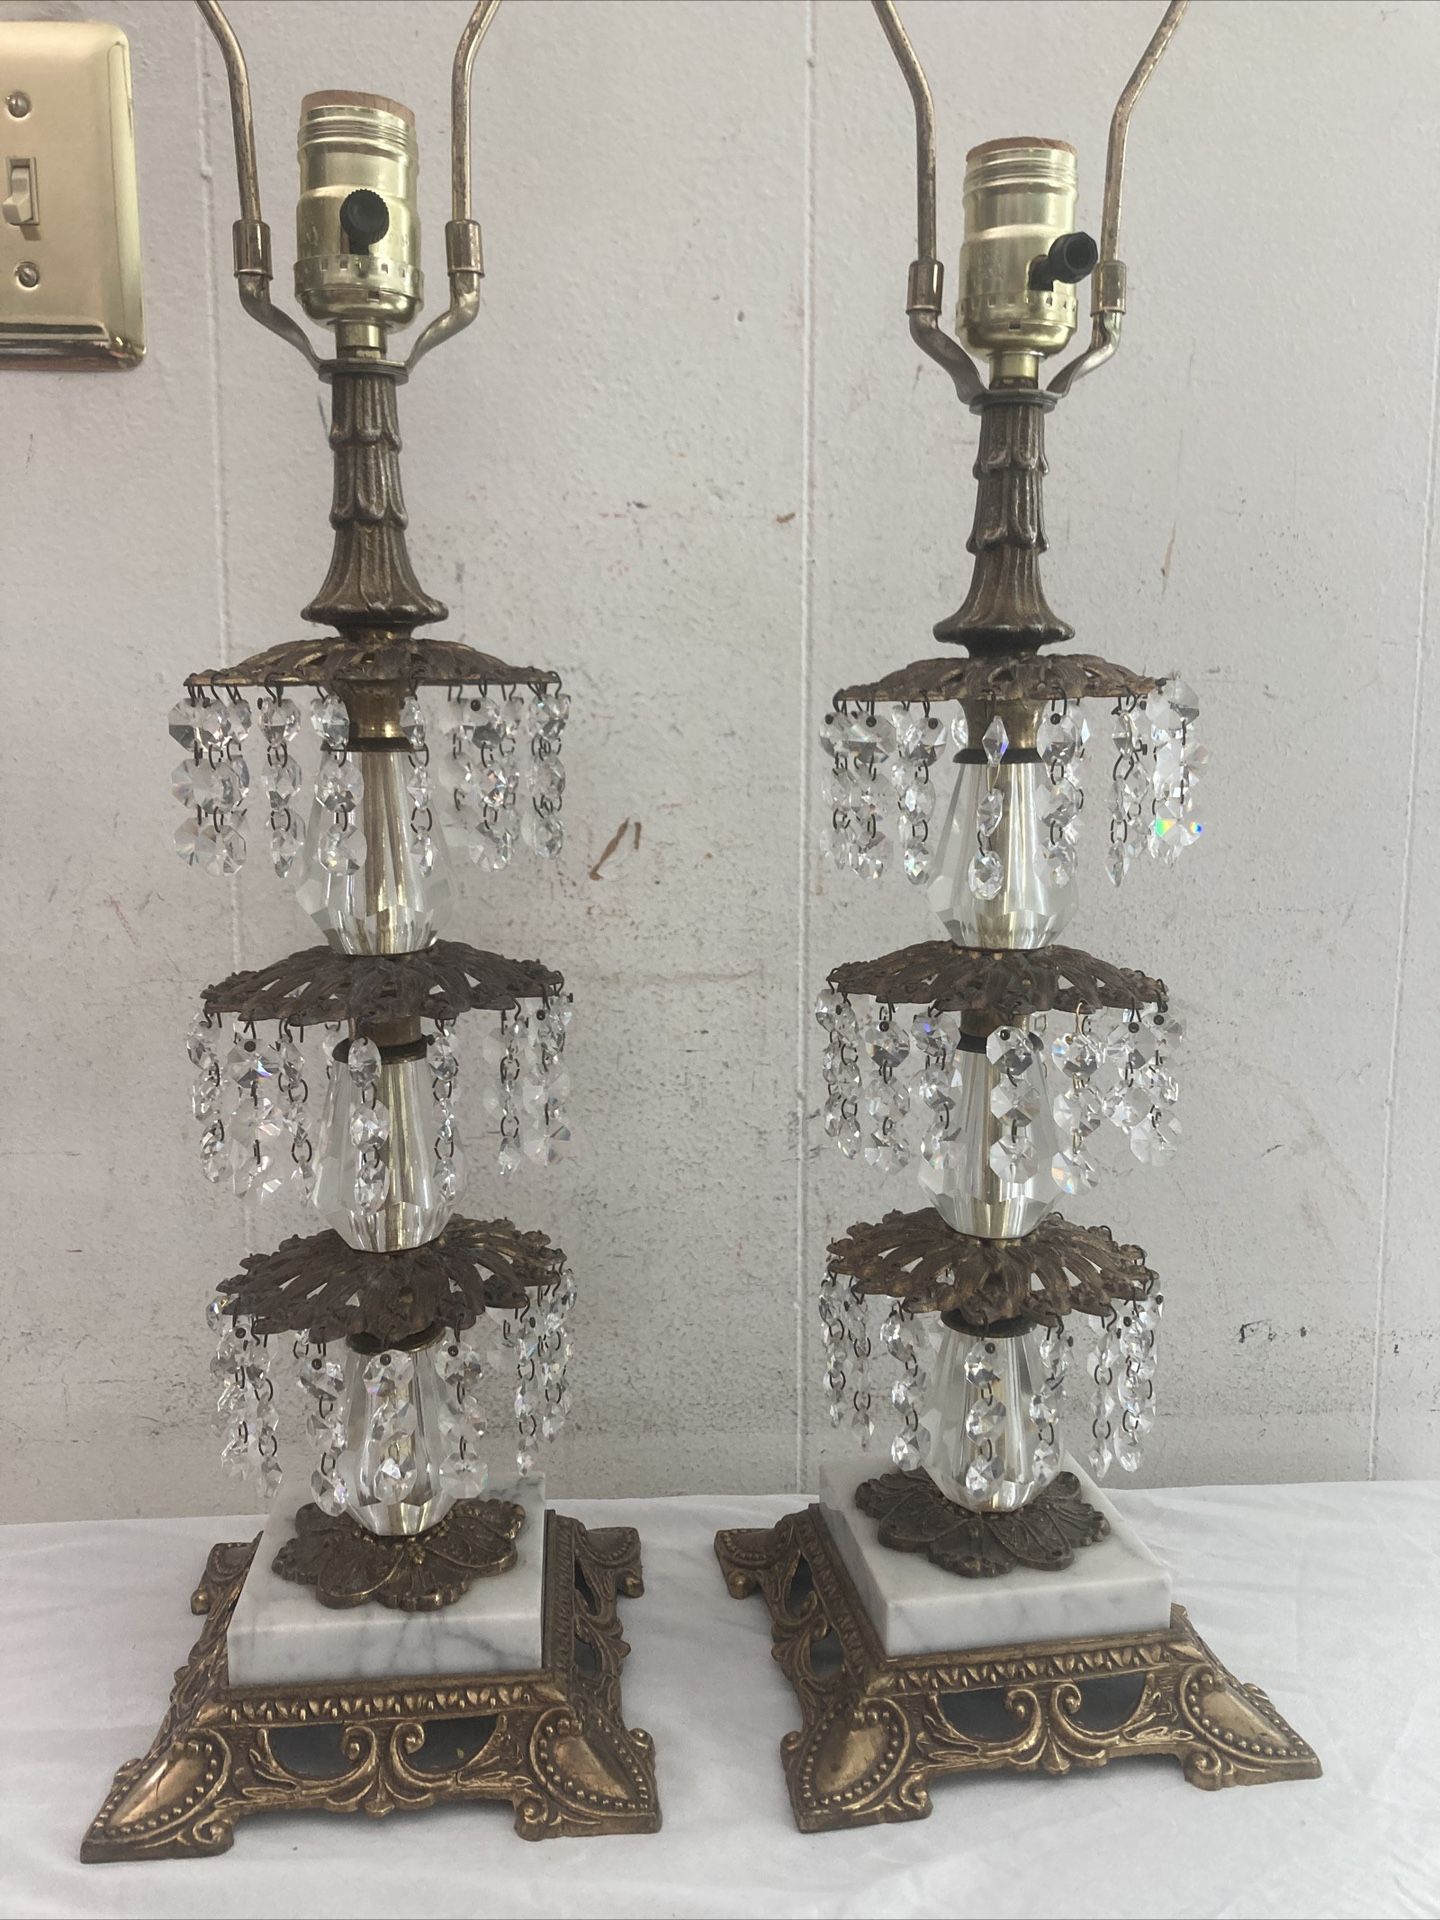 2 Vintage Brass Marble Hanging Crystal Chandelier Table Lamps